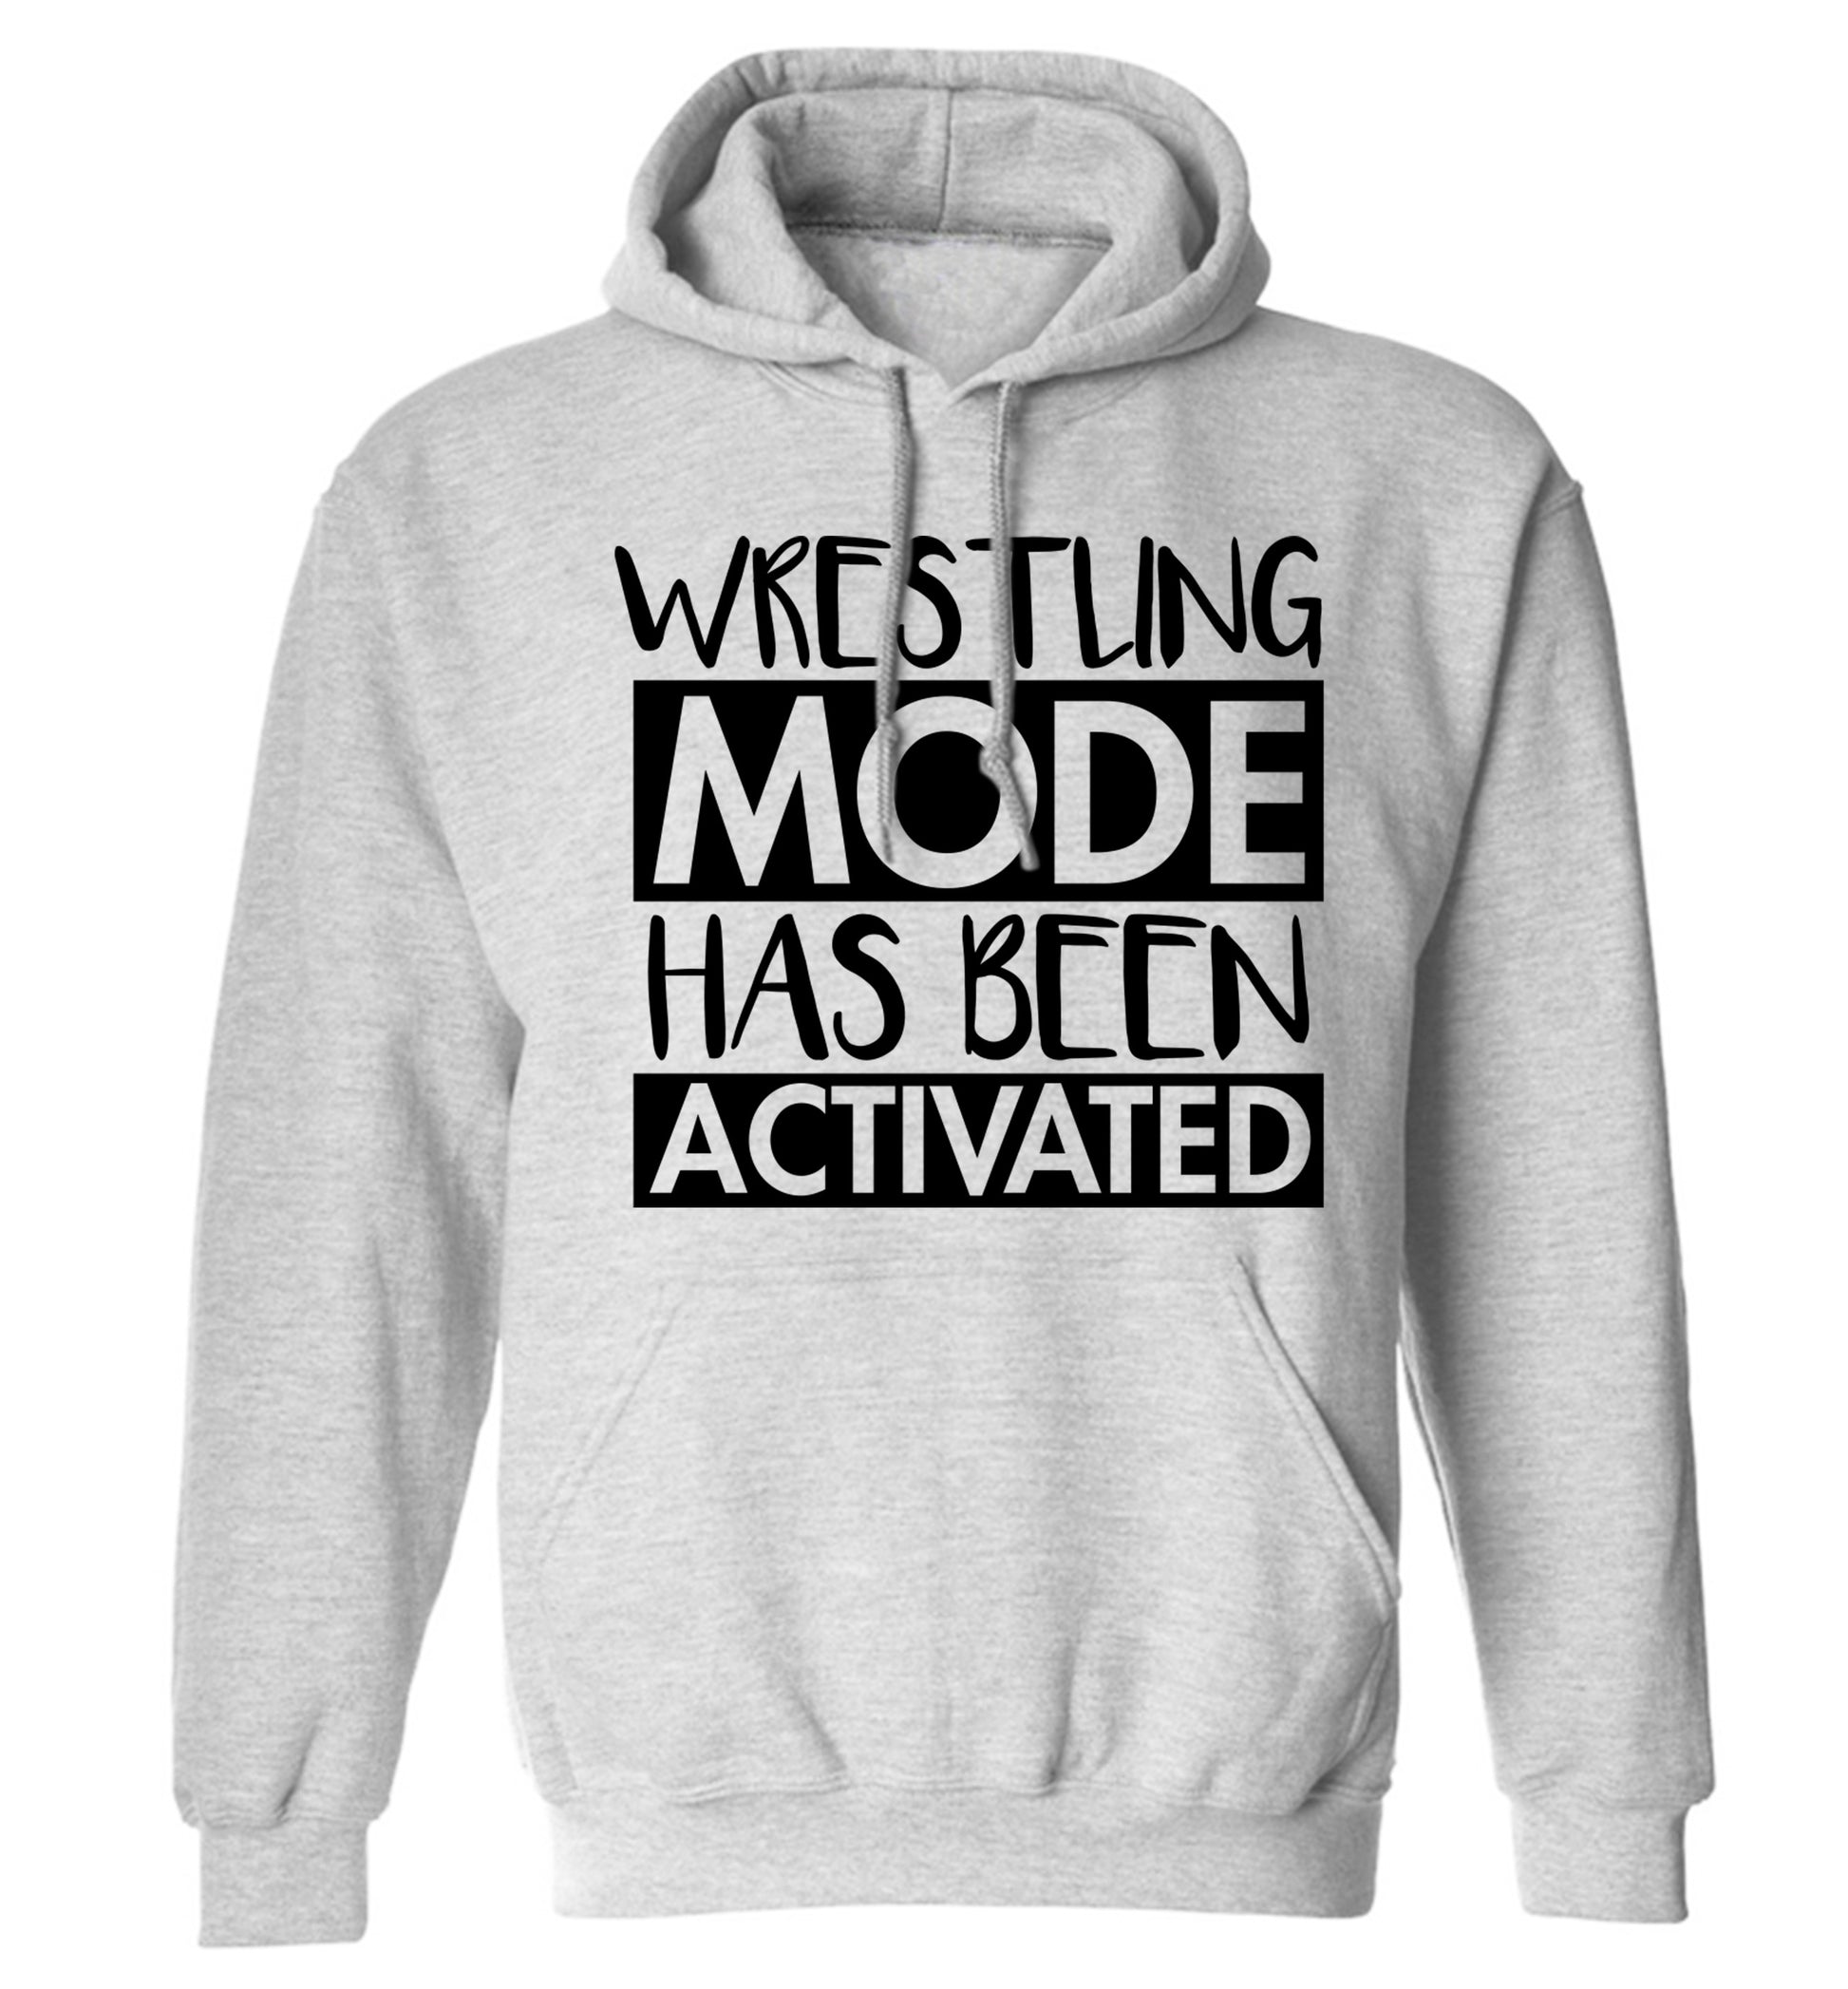 Wresting mode activated adults unisex grey hoodie 2XL